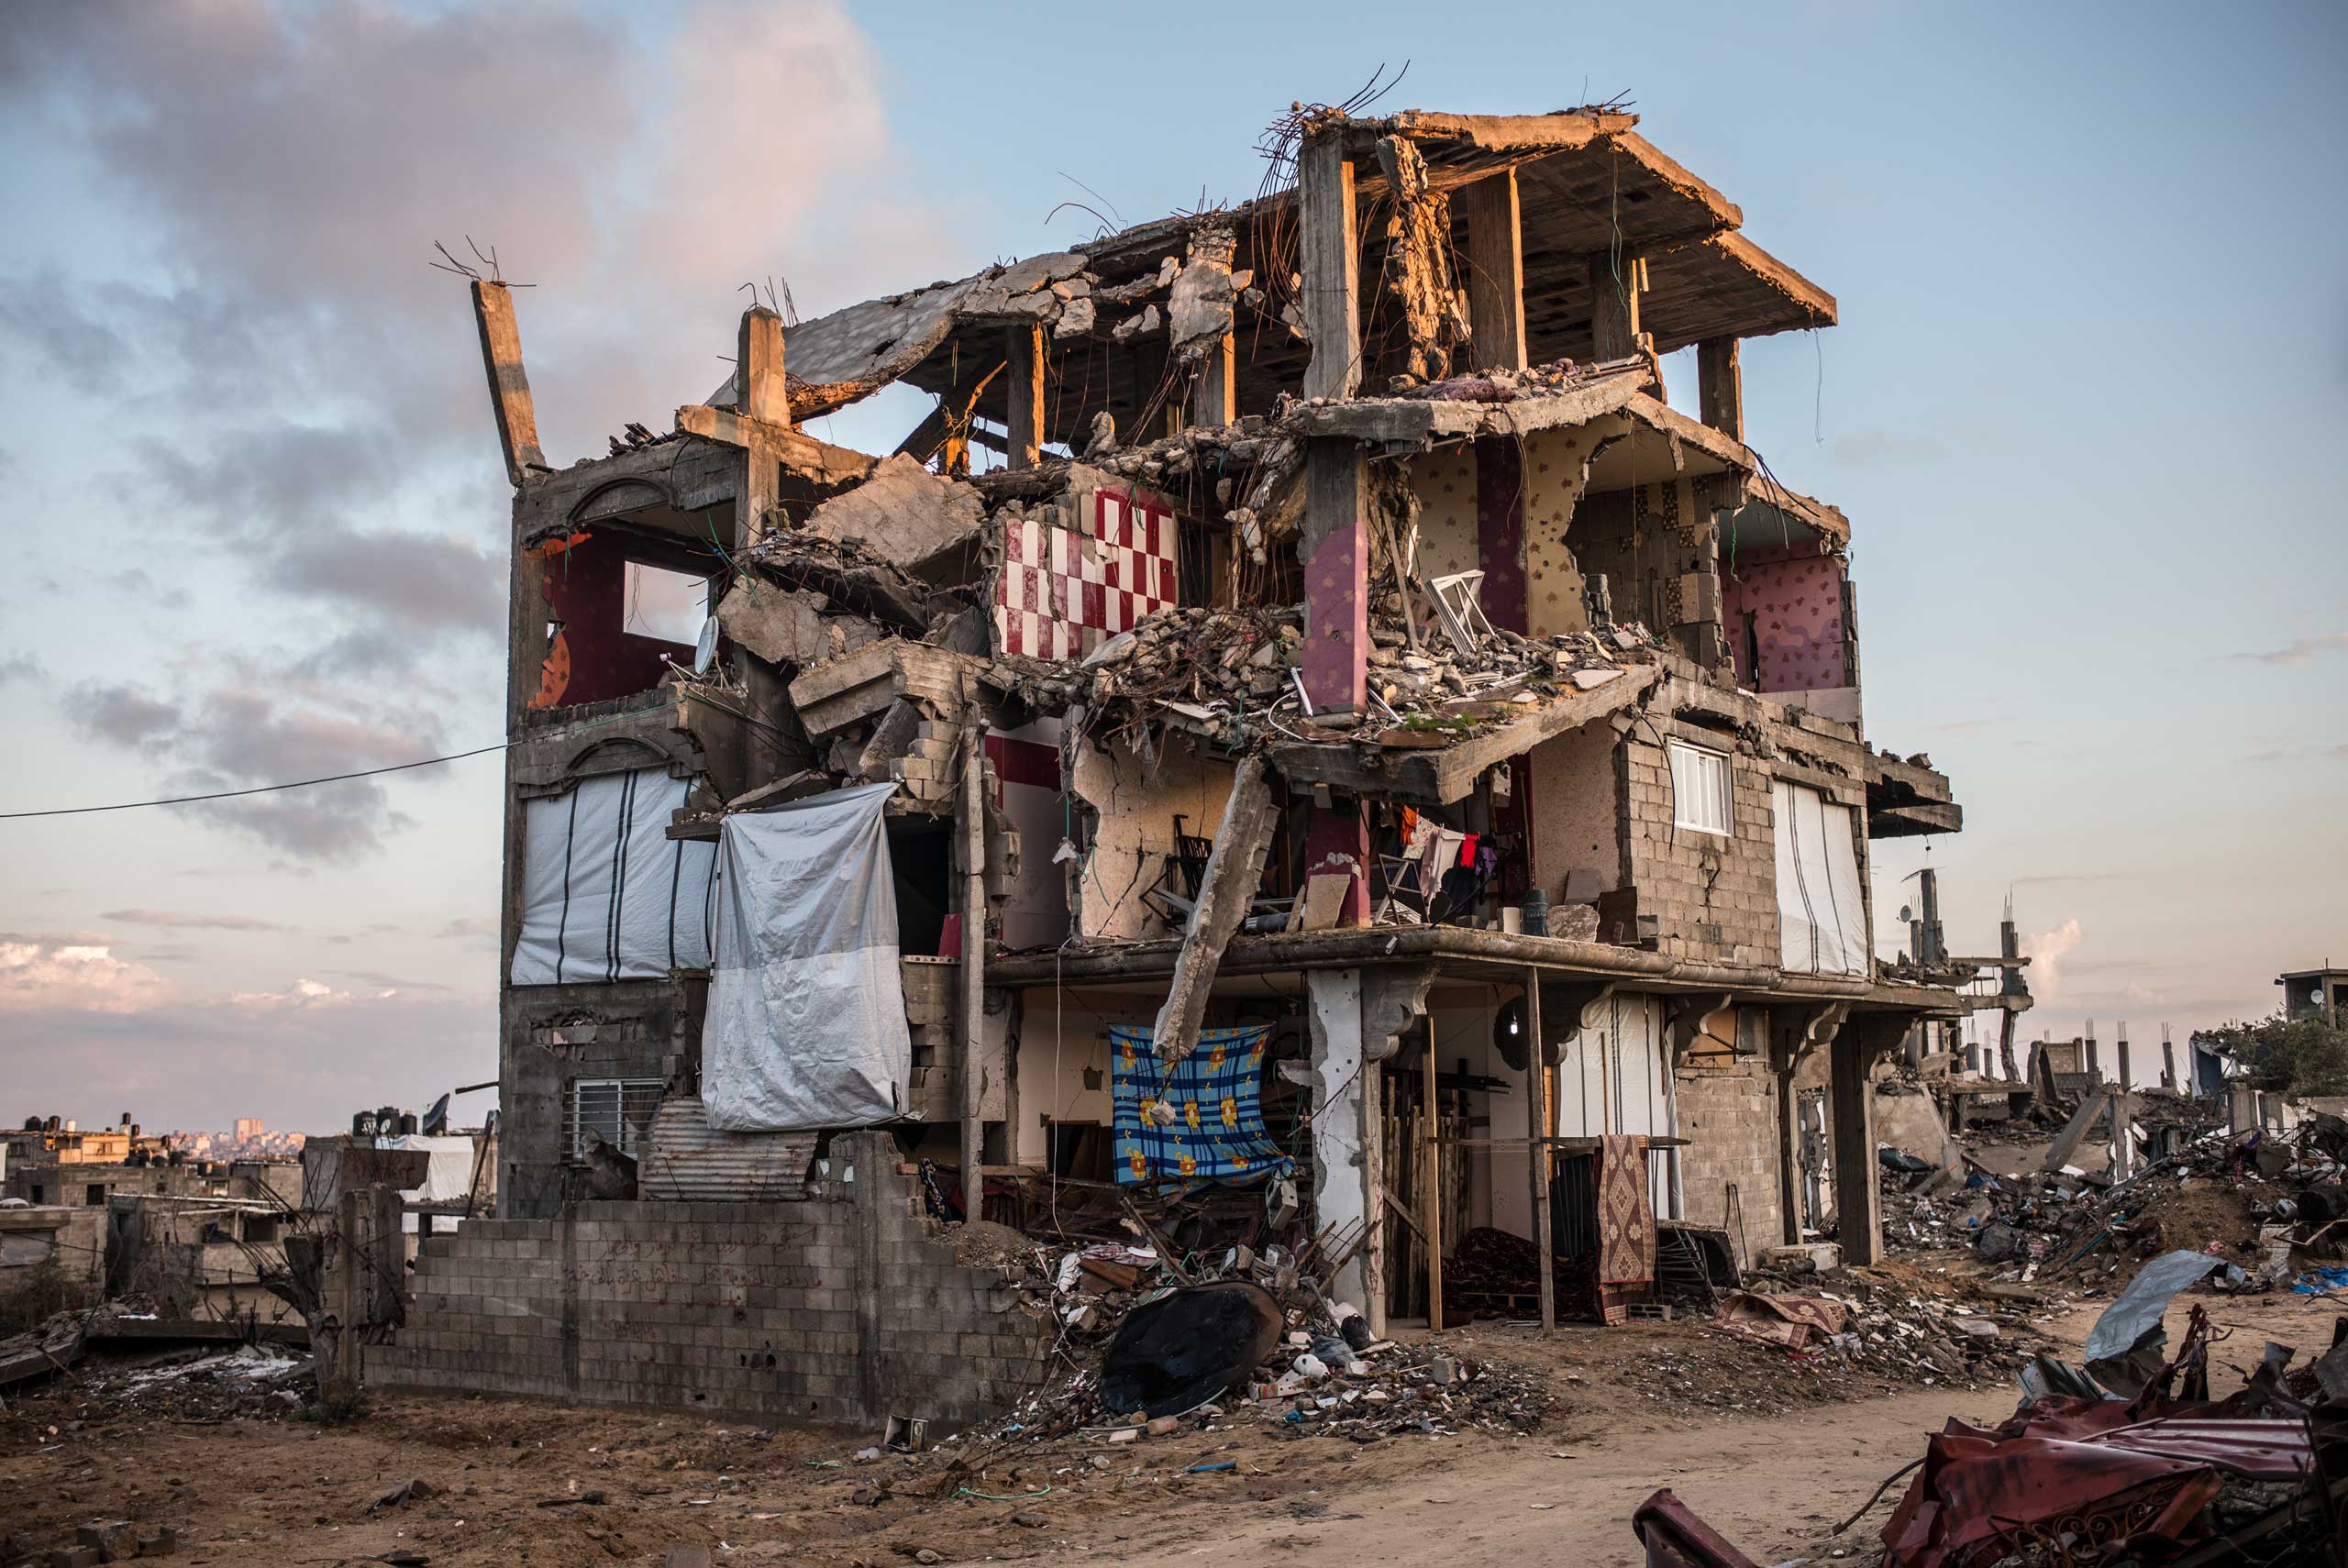 A partially destroyed building in Shejaiya, a neighborhood district of the Palestinian city of Gaza. Some family tried to replace the missing walls of their apartments with blankets. Shejaiya, the Gaza Strip. December 2014.